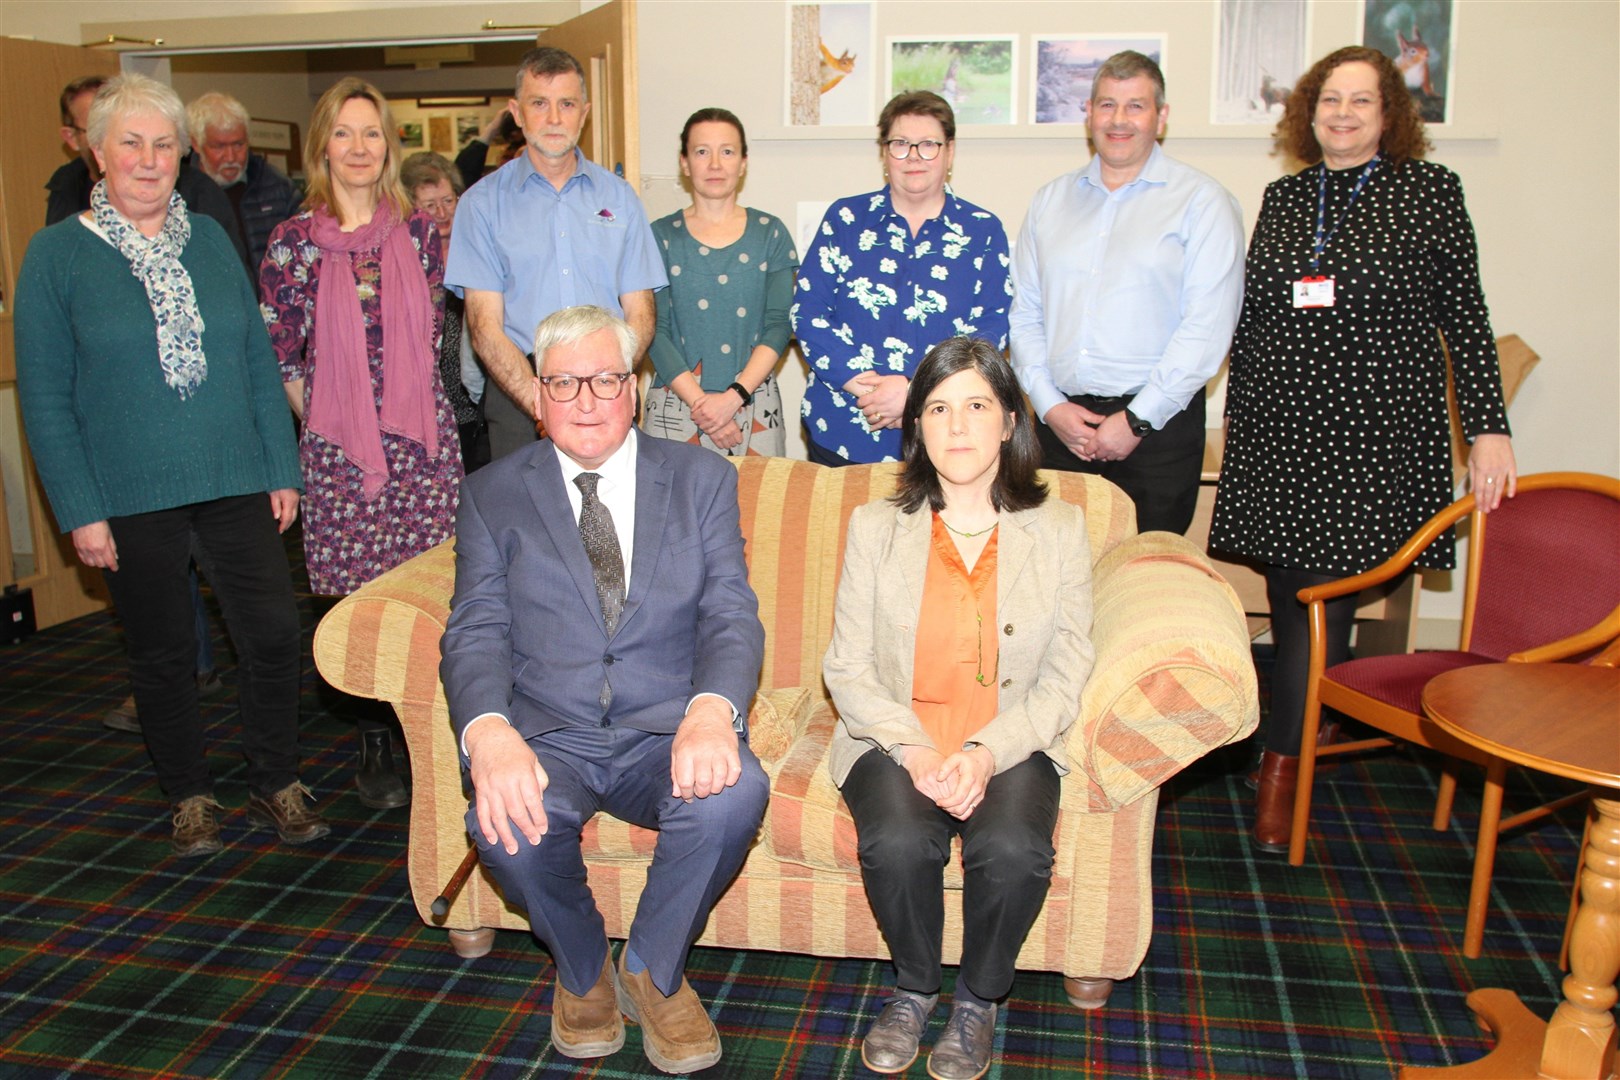 Top table: Seated are MSP Fergus Ewing and Dr Catriona Clubb. Standing, from left are Linda Coe, Dr Sharon Hamilton, Dr Andrew Melton, Dr Paula Starritt, Grantown Medical Practice Executive Manager Kathy Cockburn, Richard MacDonald (NHS Deputy Director of Estate Facilities) and Pam Cremin (NHS Chief Officer Highland). Picture Frances Porter